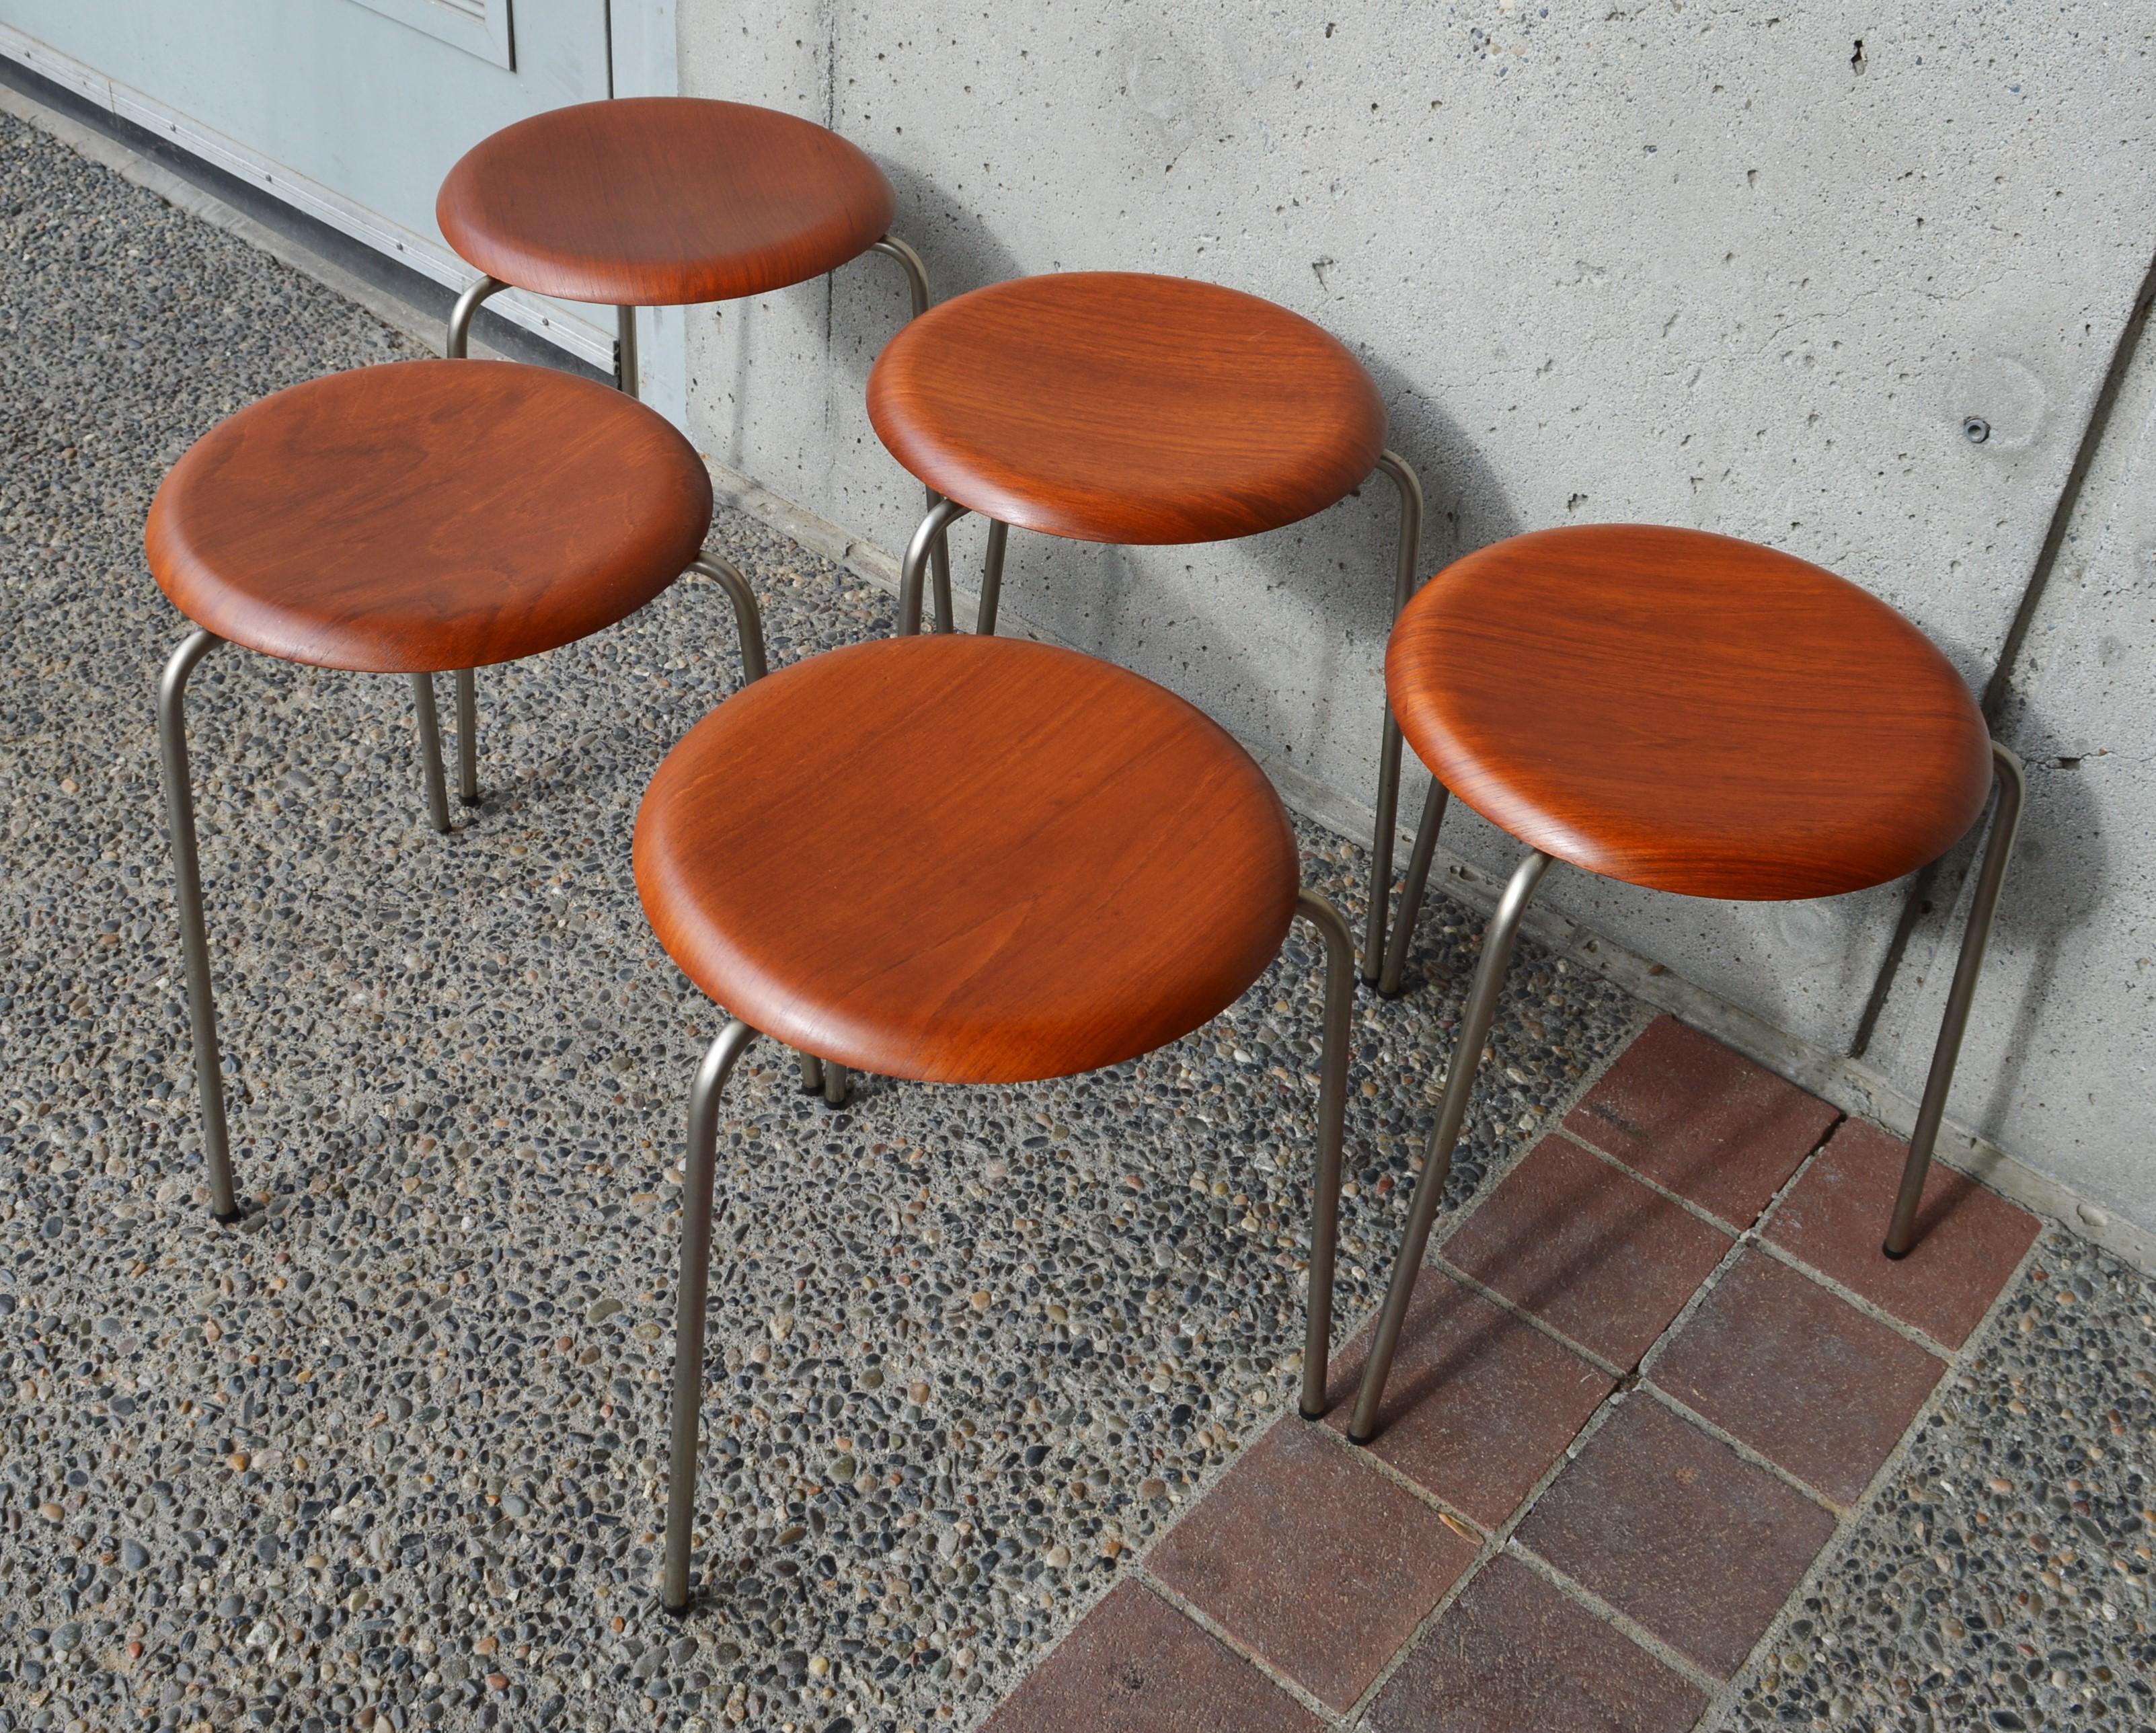 Gorgeous and rare set of 5 dot stools by Arne Jacobsen for Fritz Hansen, 1960s. This stackable collection features a curved, bent ply teak top and the original three legged metal base. Restored and in gorgeous condition (one seat has 2 vague